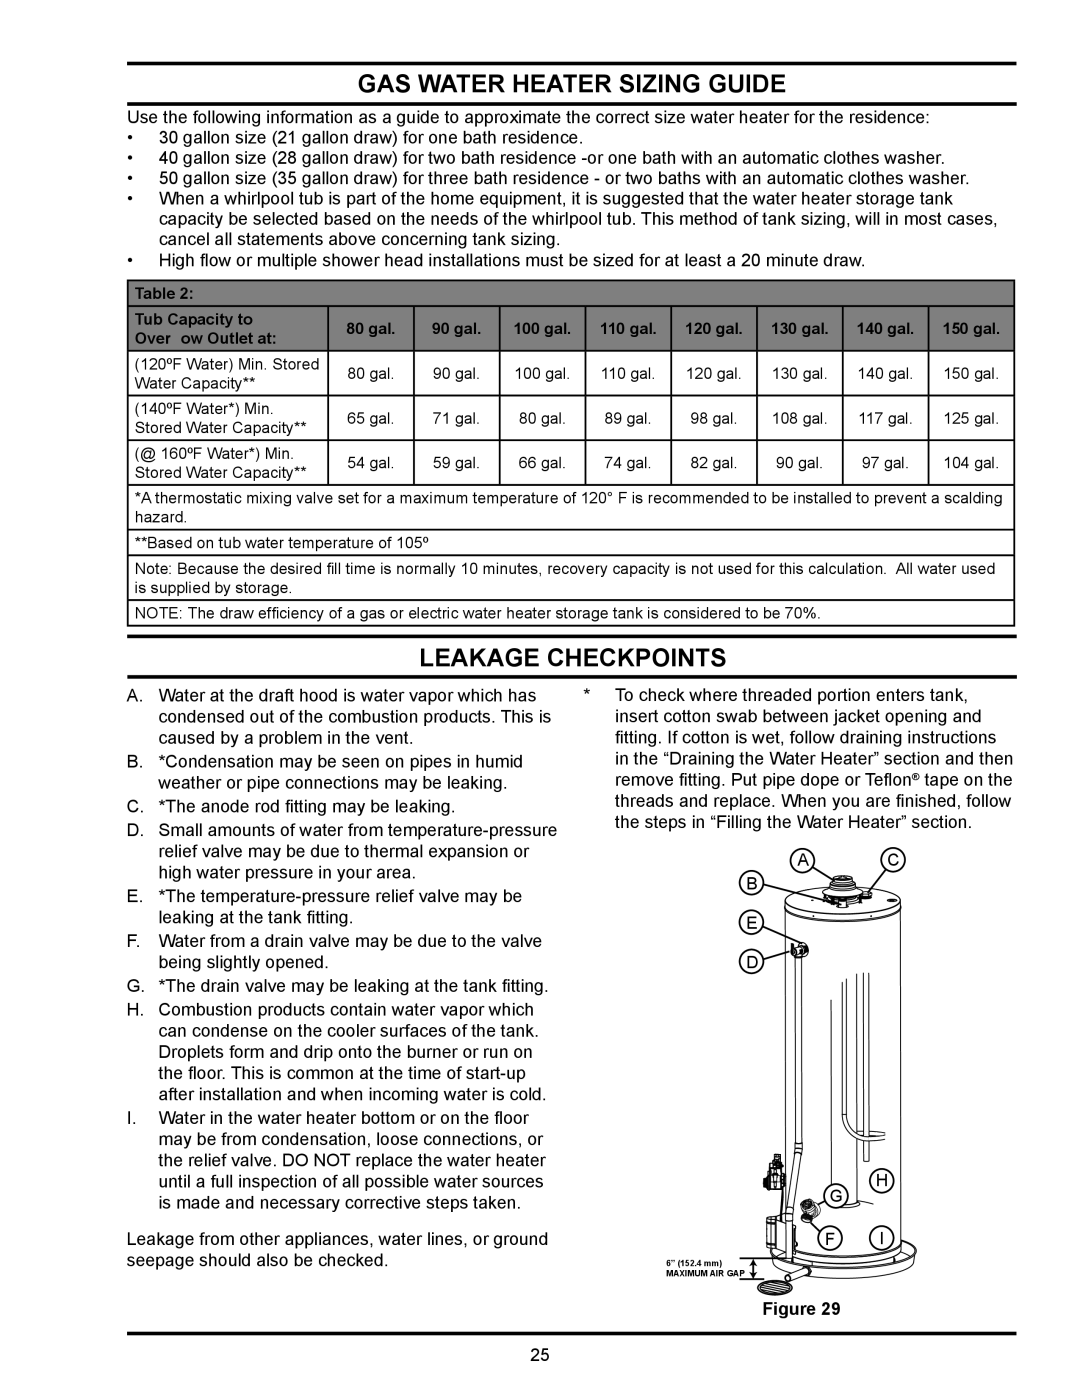 State Industries GS6, GSX, GPX manual GAS Water Heater Sizing Guide, Leakage Checkpoints 